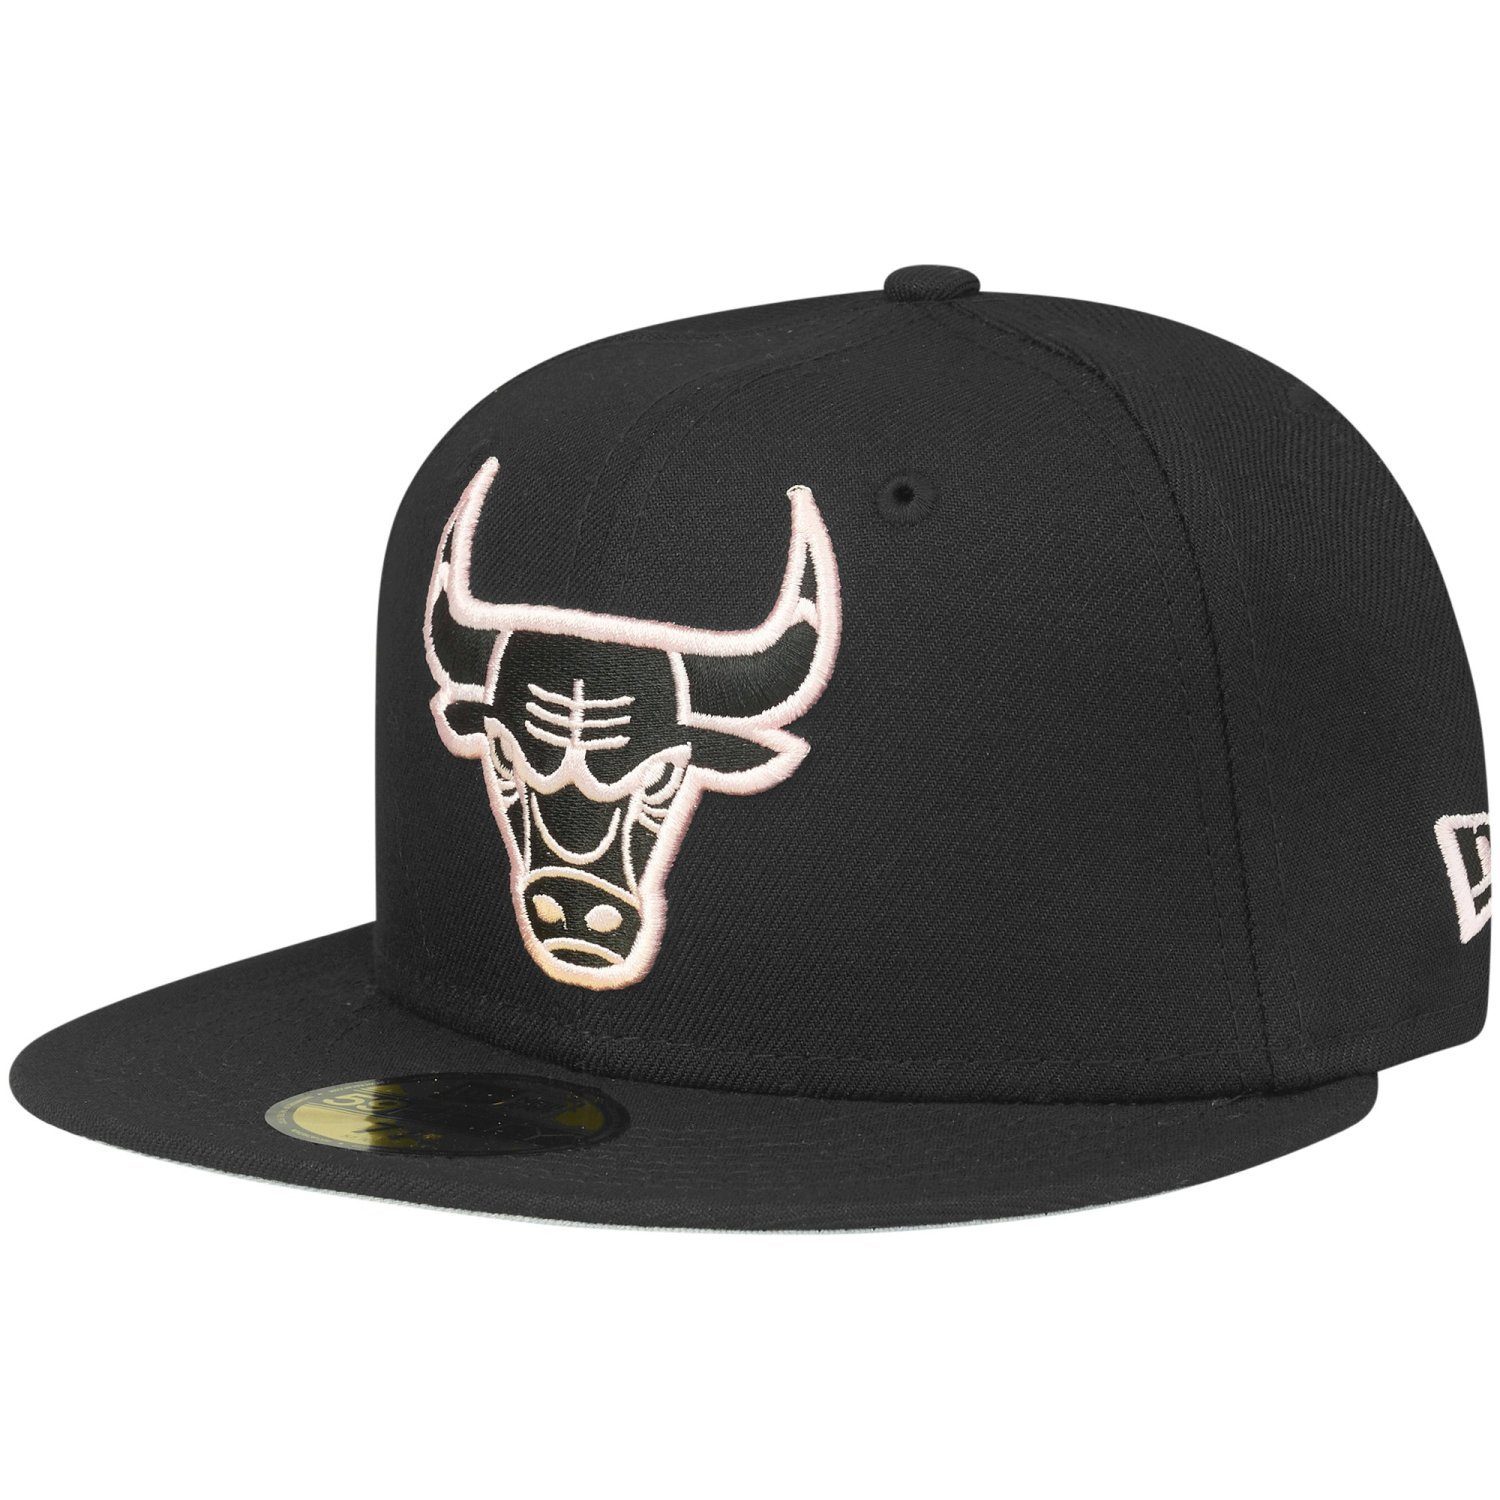 New Era Fitted Cap 59Fifty Chicago Bulls